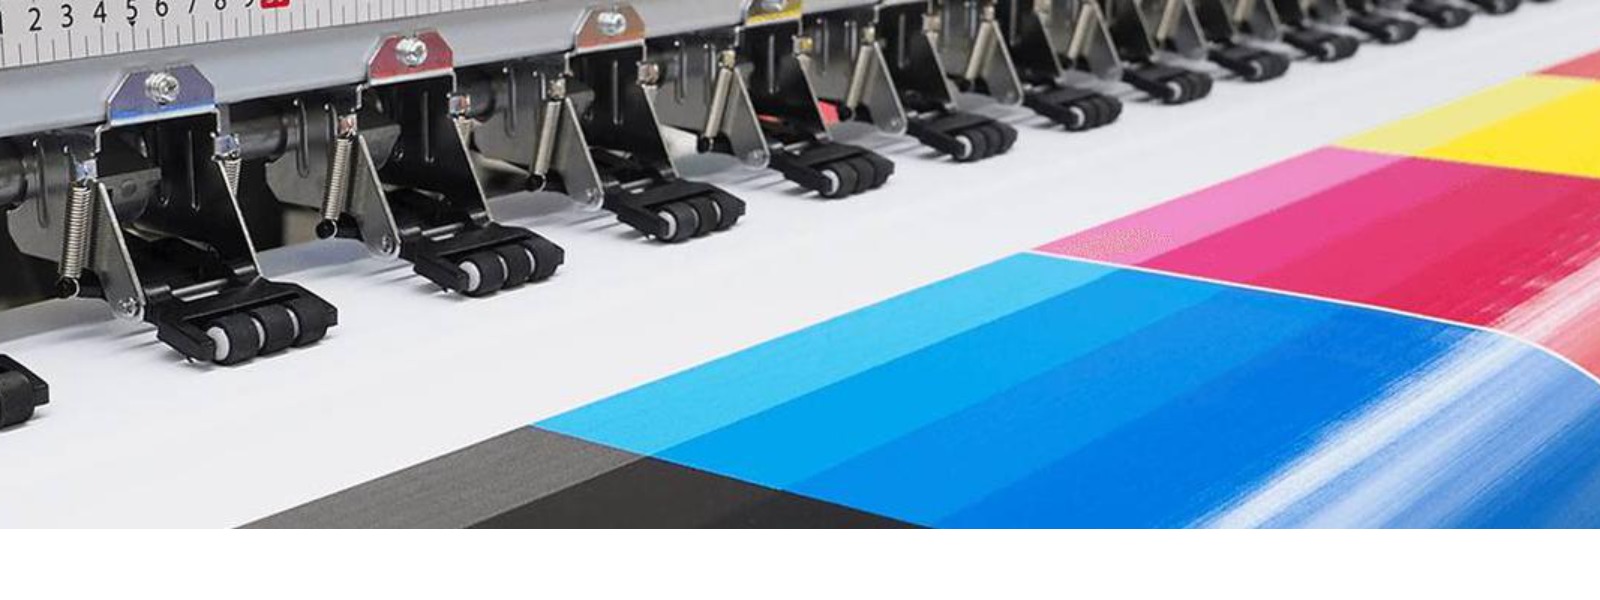 LABELPRINT OÜ - We are a flexo printing house with the best technical capabilities: we print stickers, sticker labels, sh...